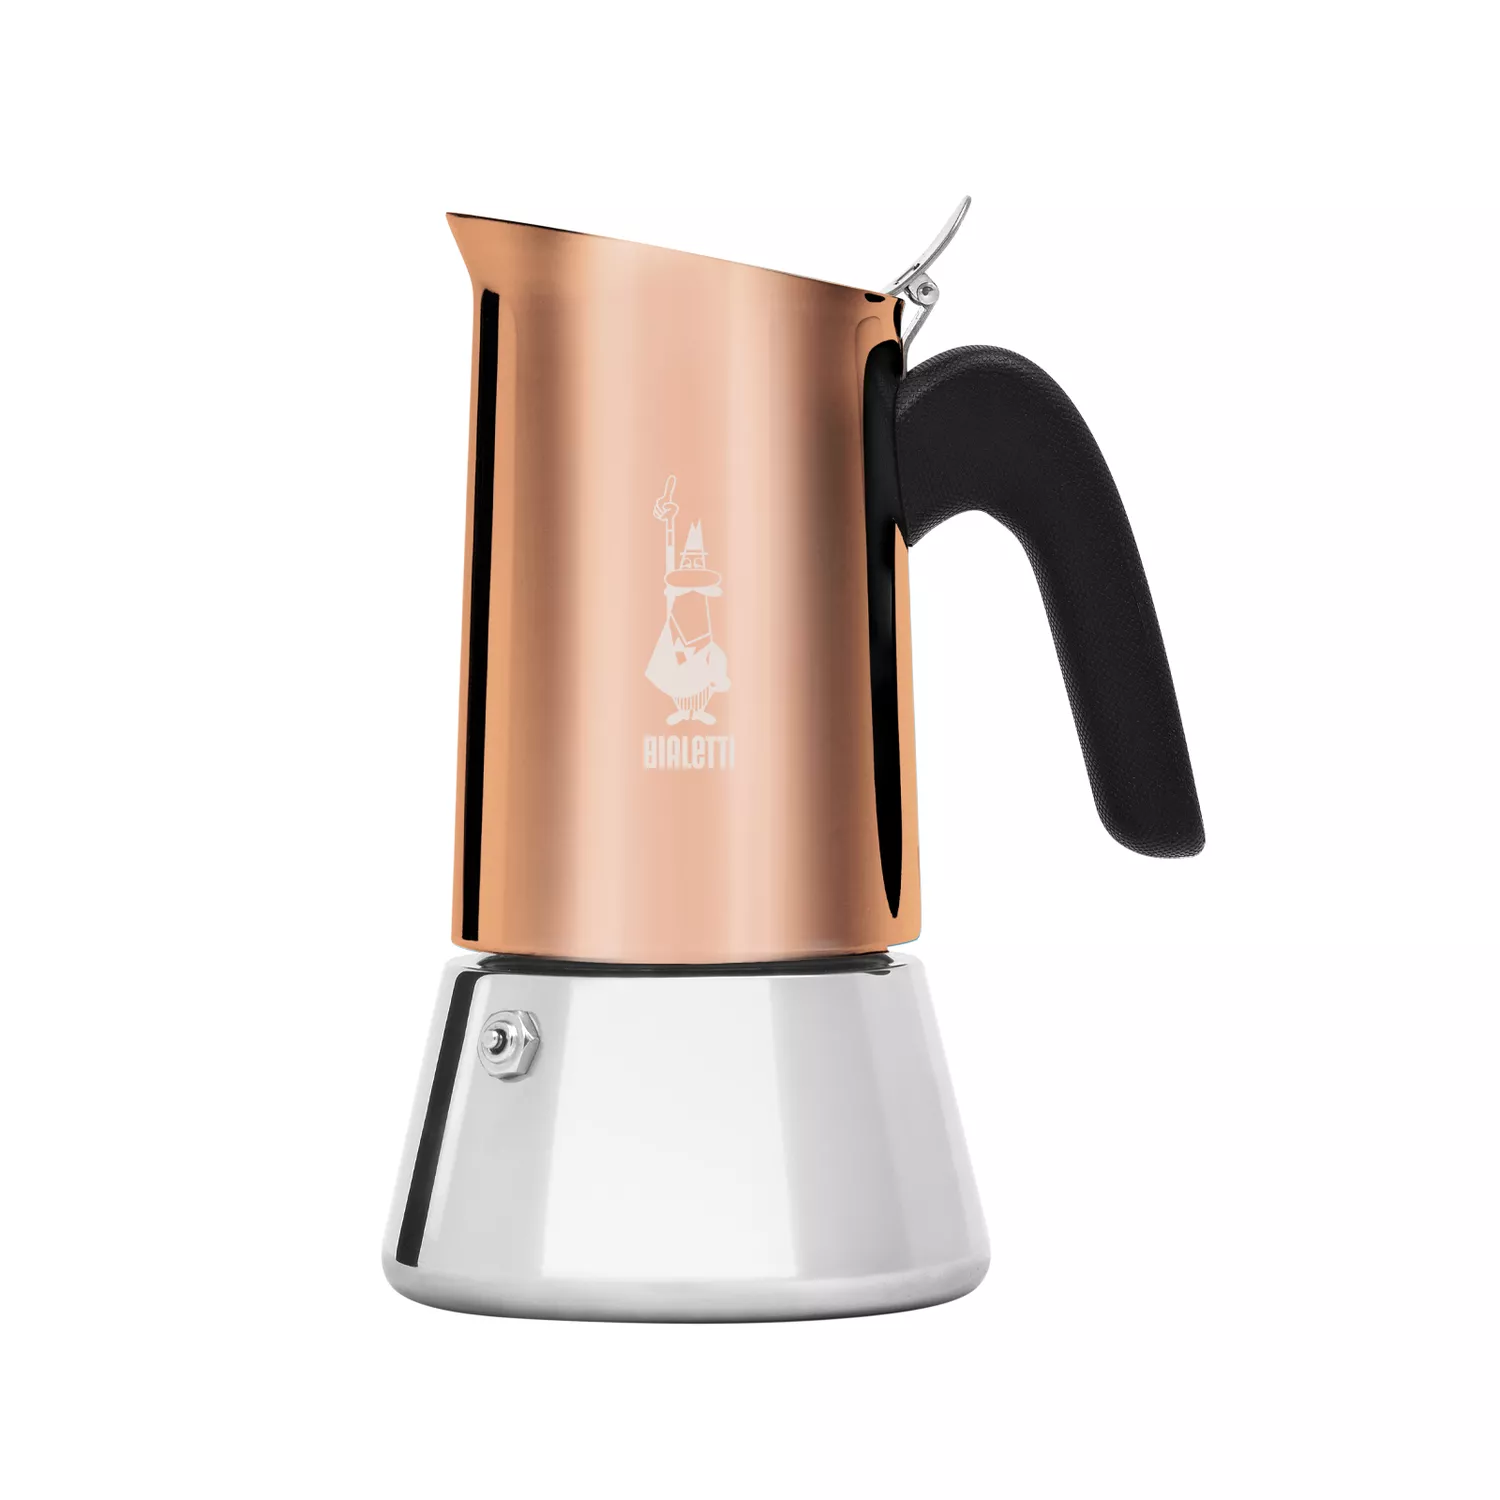 Bialetti Brikka Induction Four Cups -  – Online shop